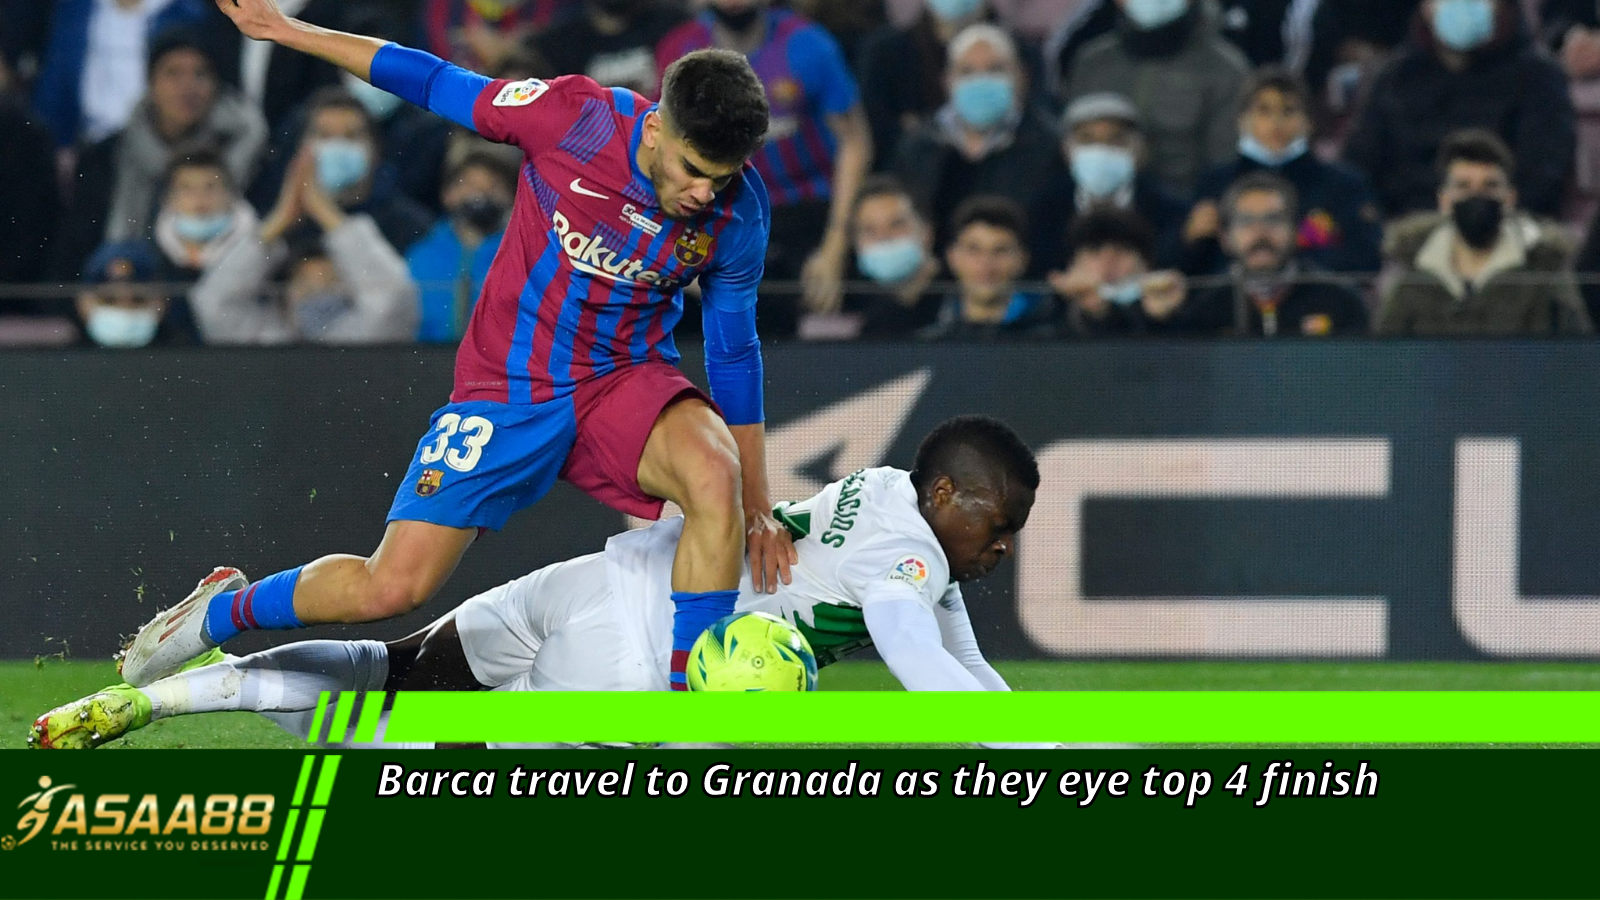 Barca travel to Granada as they eye top 4 finish